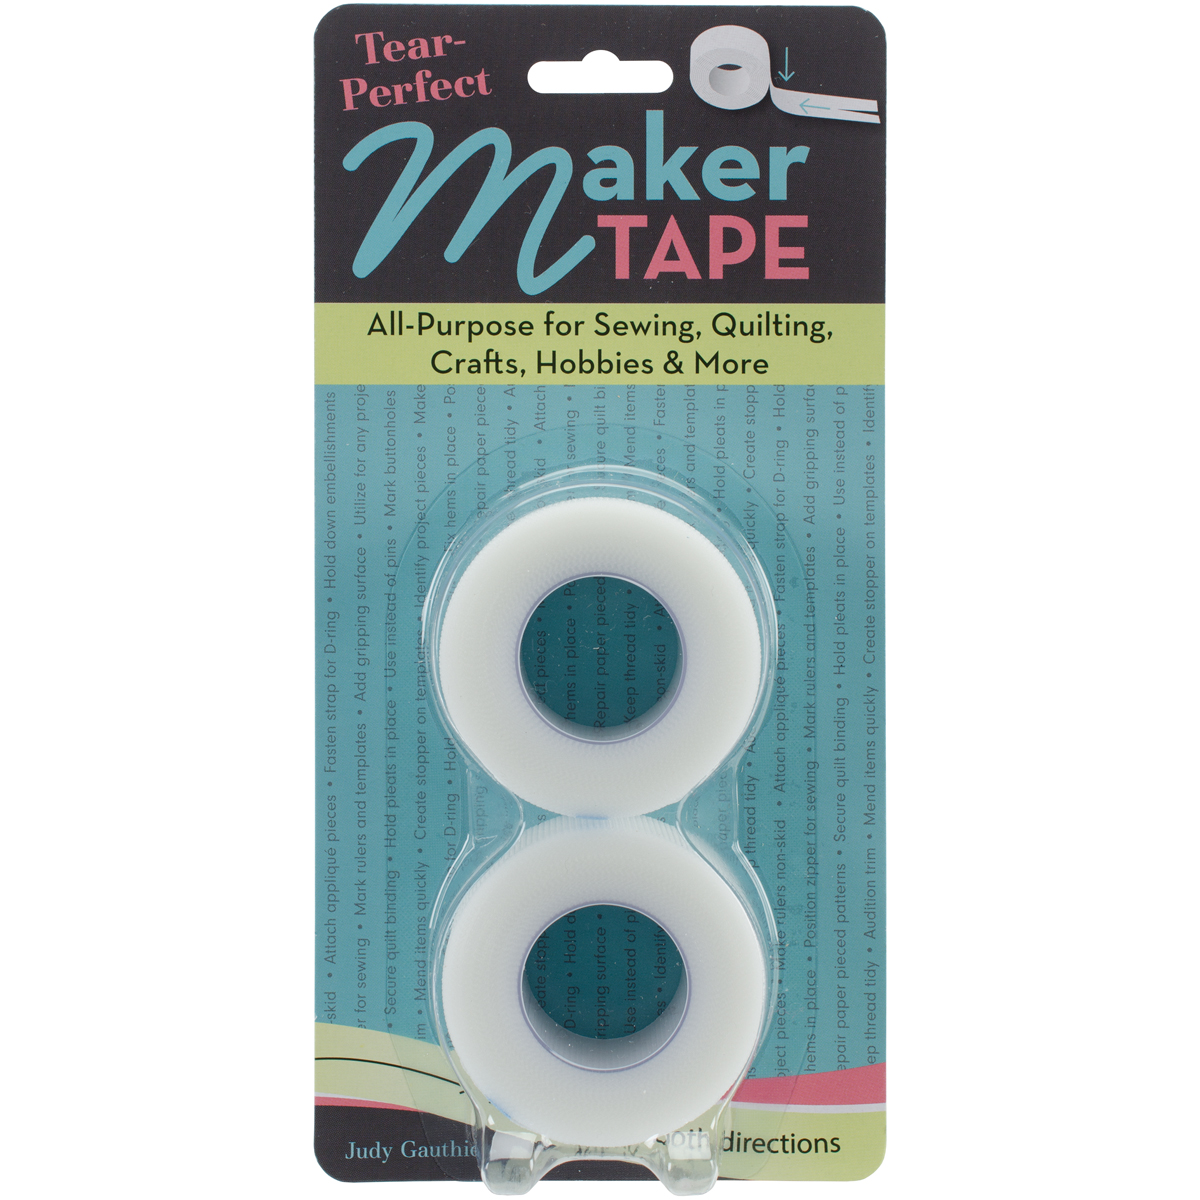 C&t Publishing 20336 Tear-perfect Maker Tape 1 In. X 10 Yards - 2 Per Pack